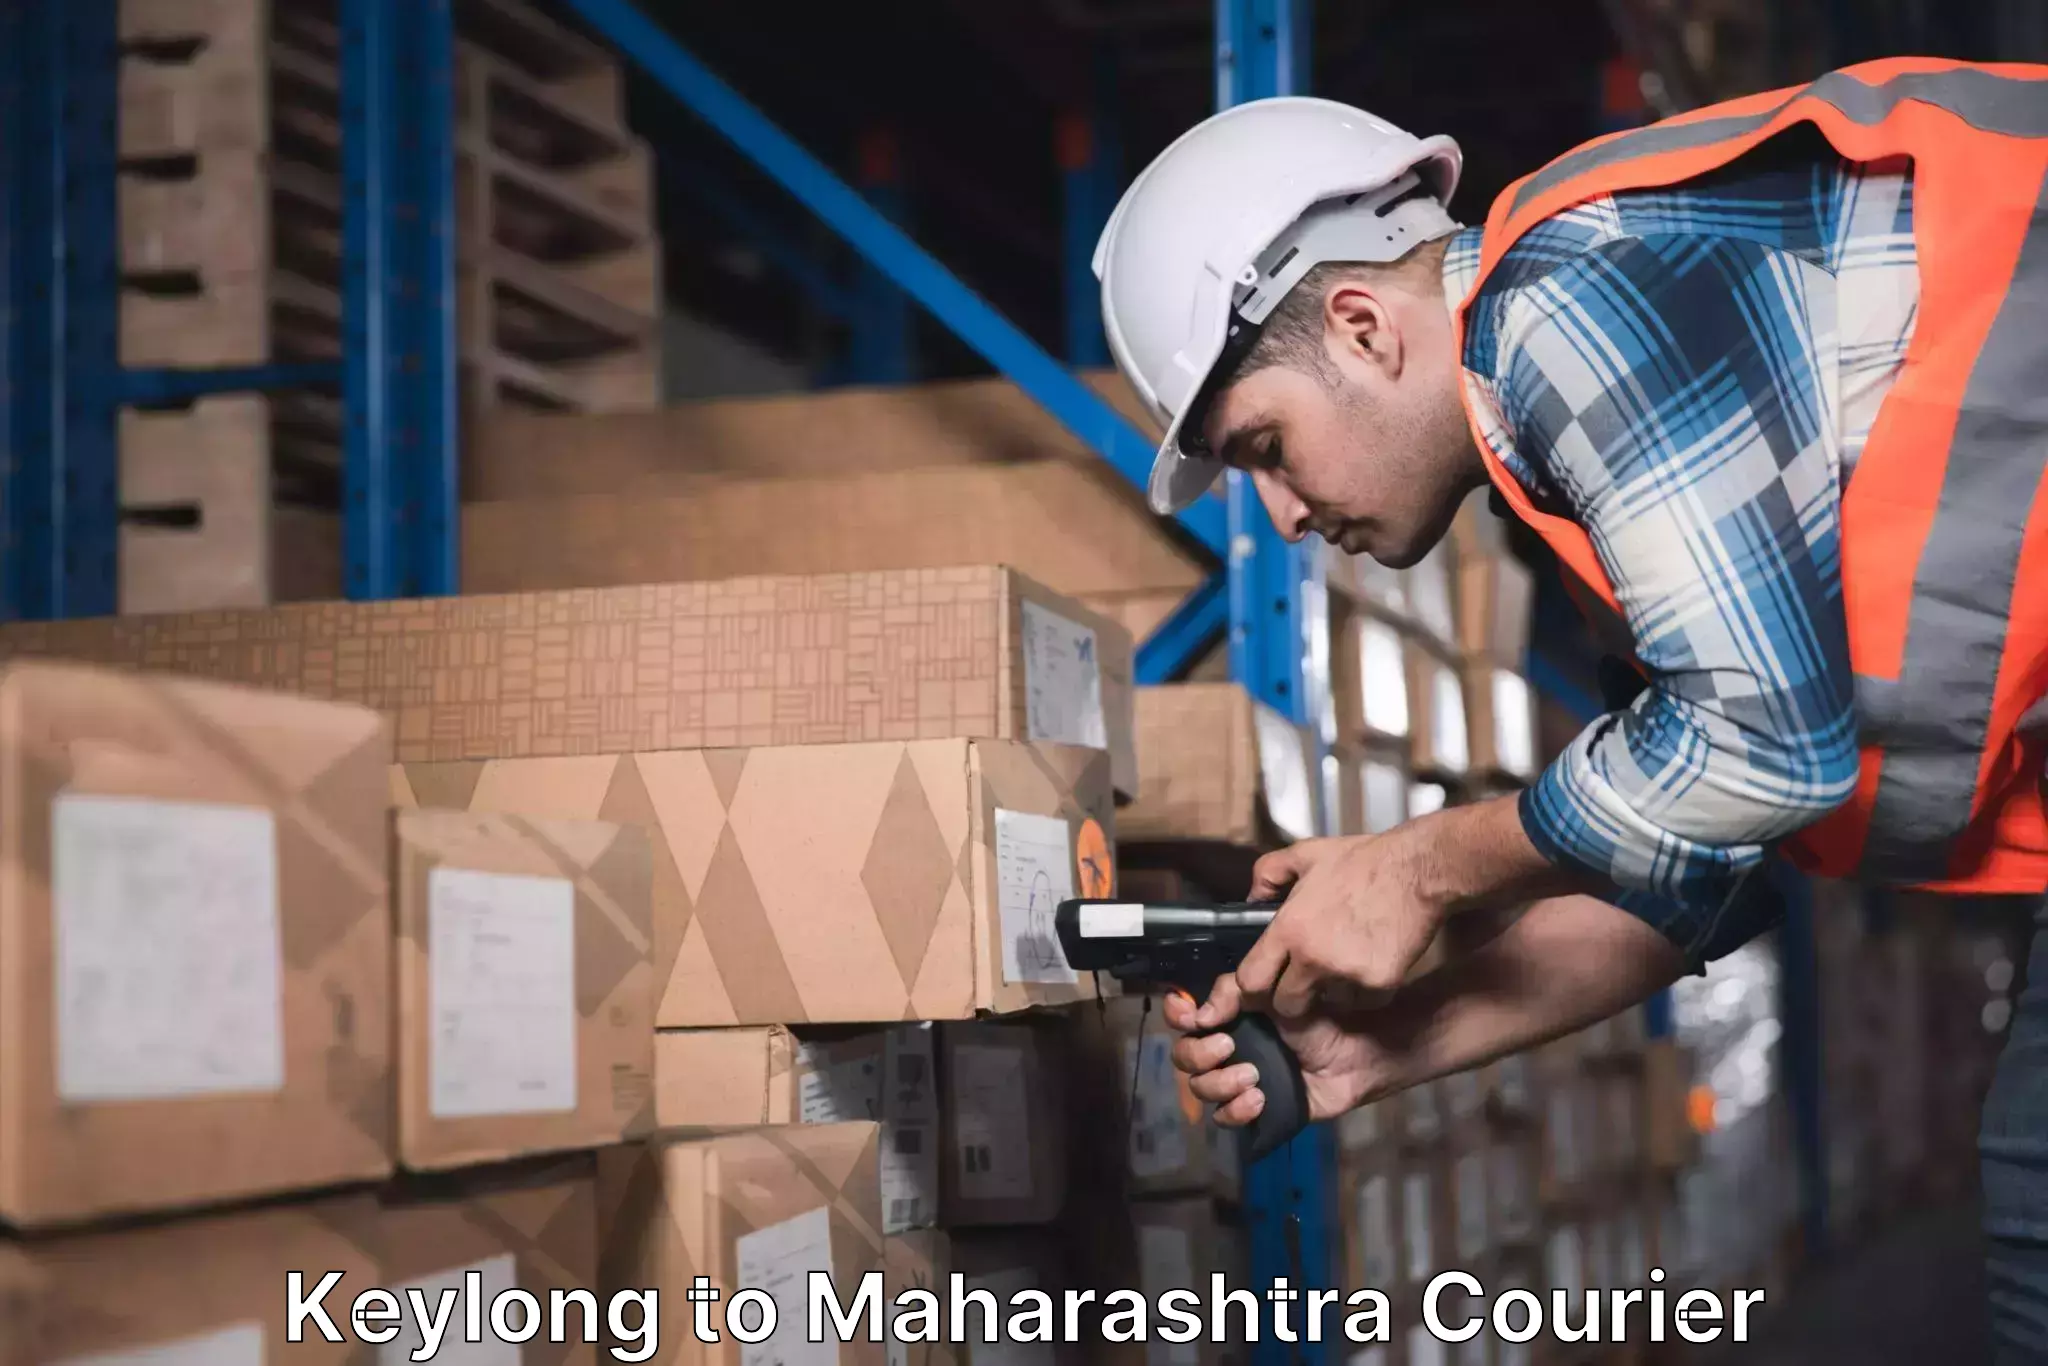 Business delivery service Keylong to Mumbai Port